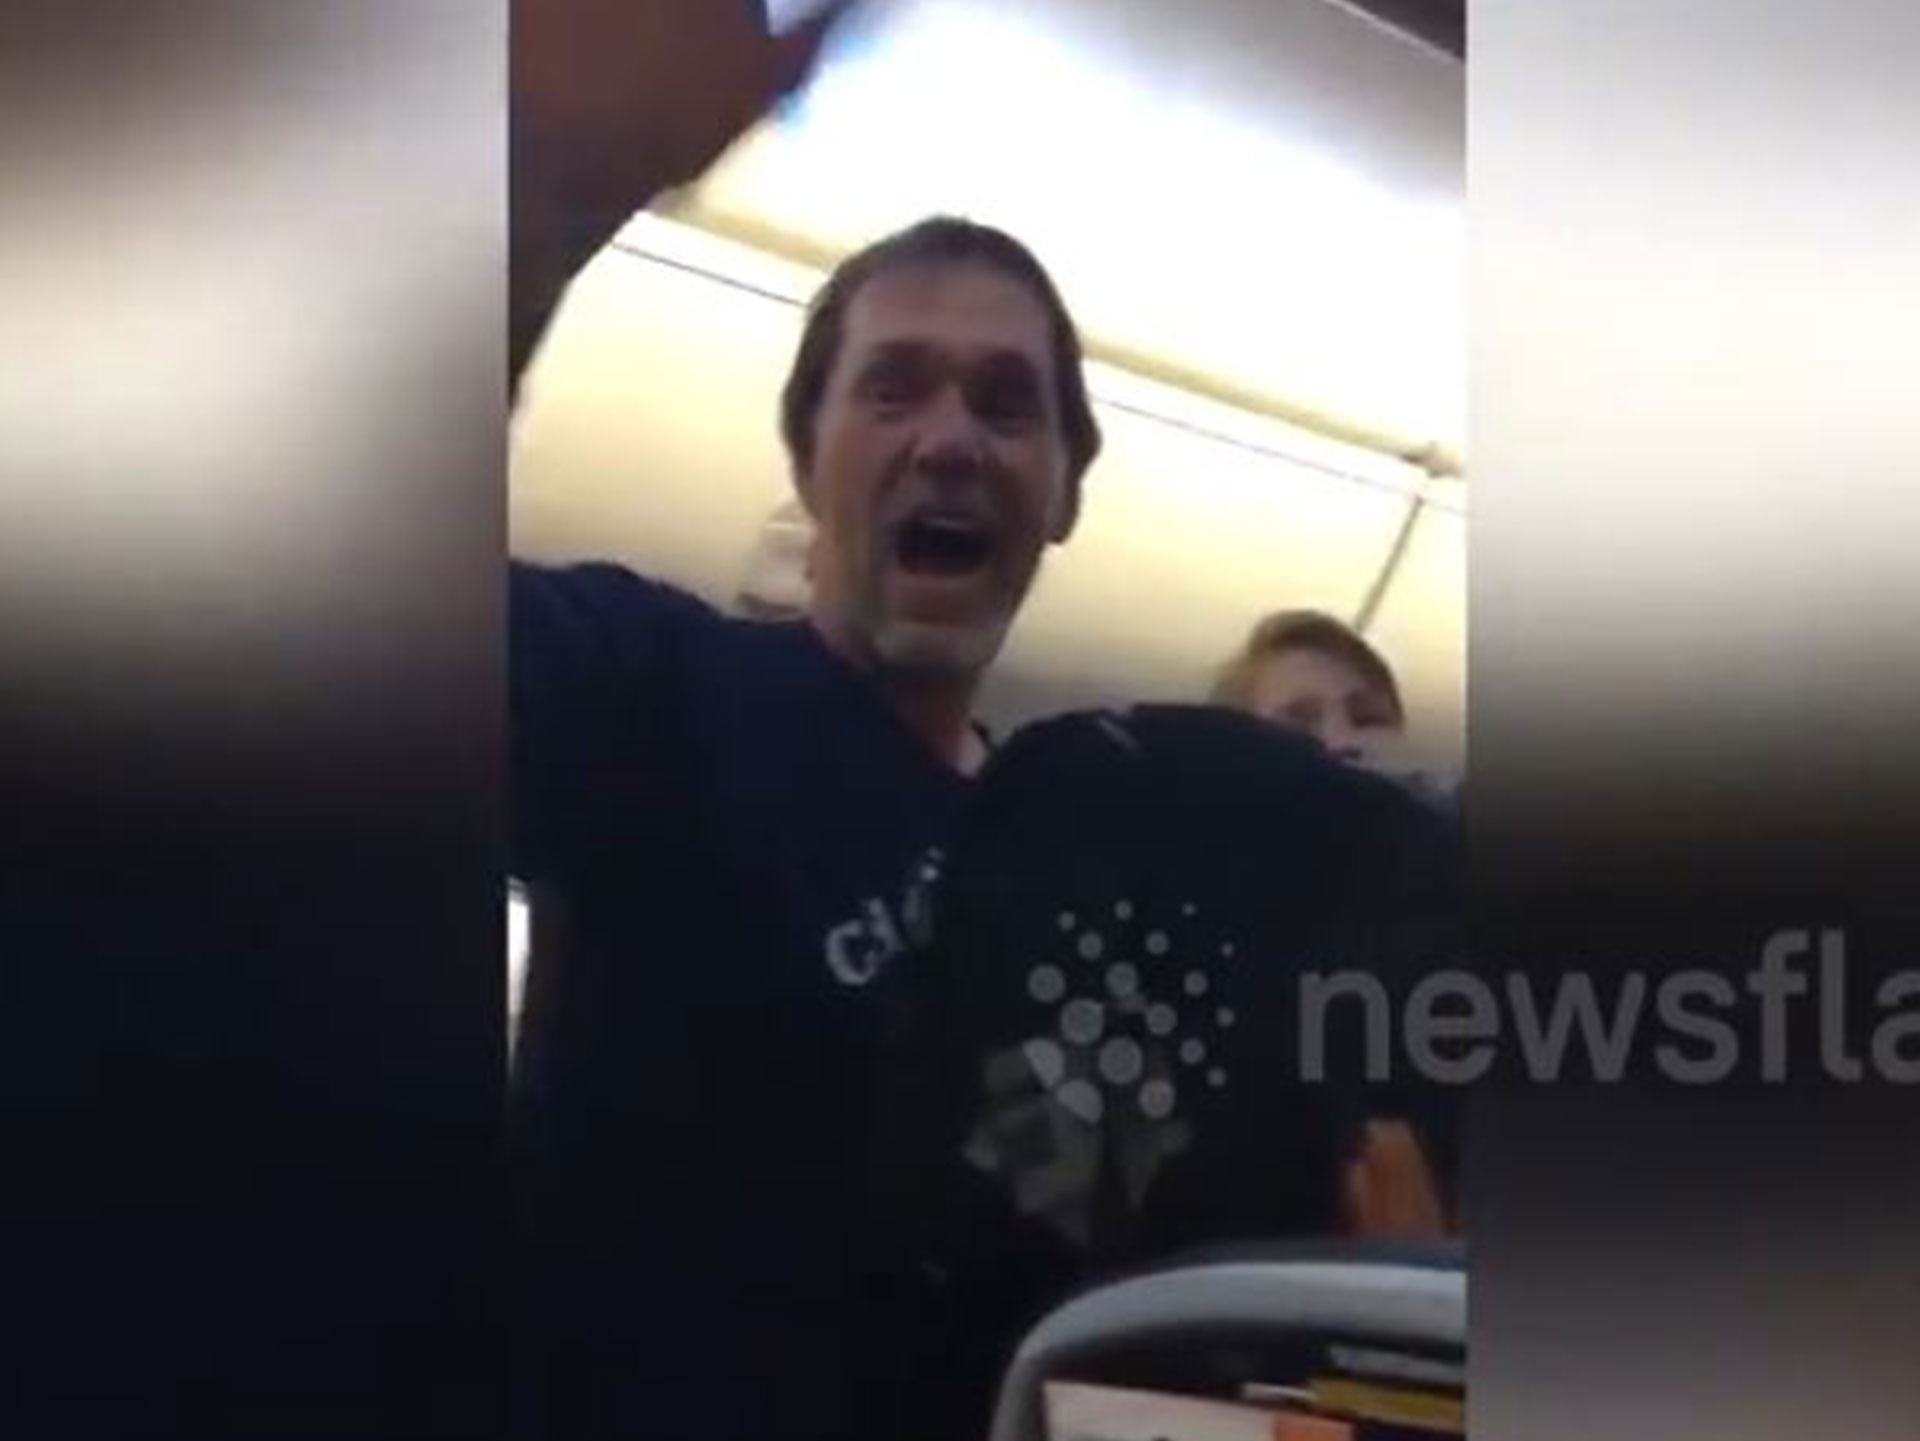 Man kicked off flight after inflammatory racist remarks